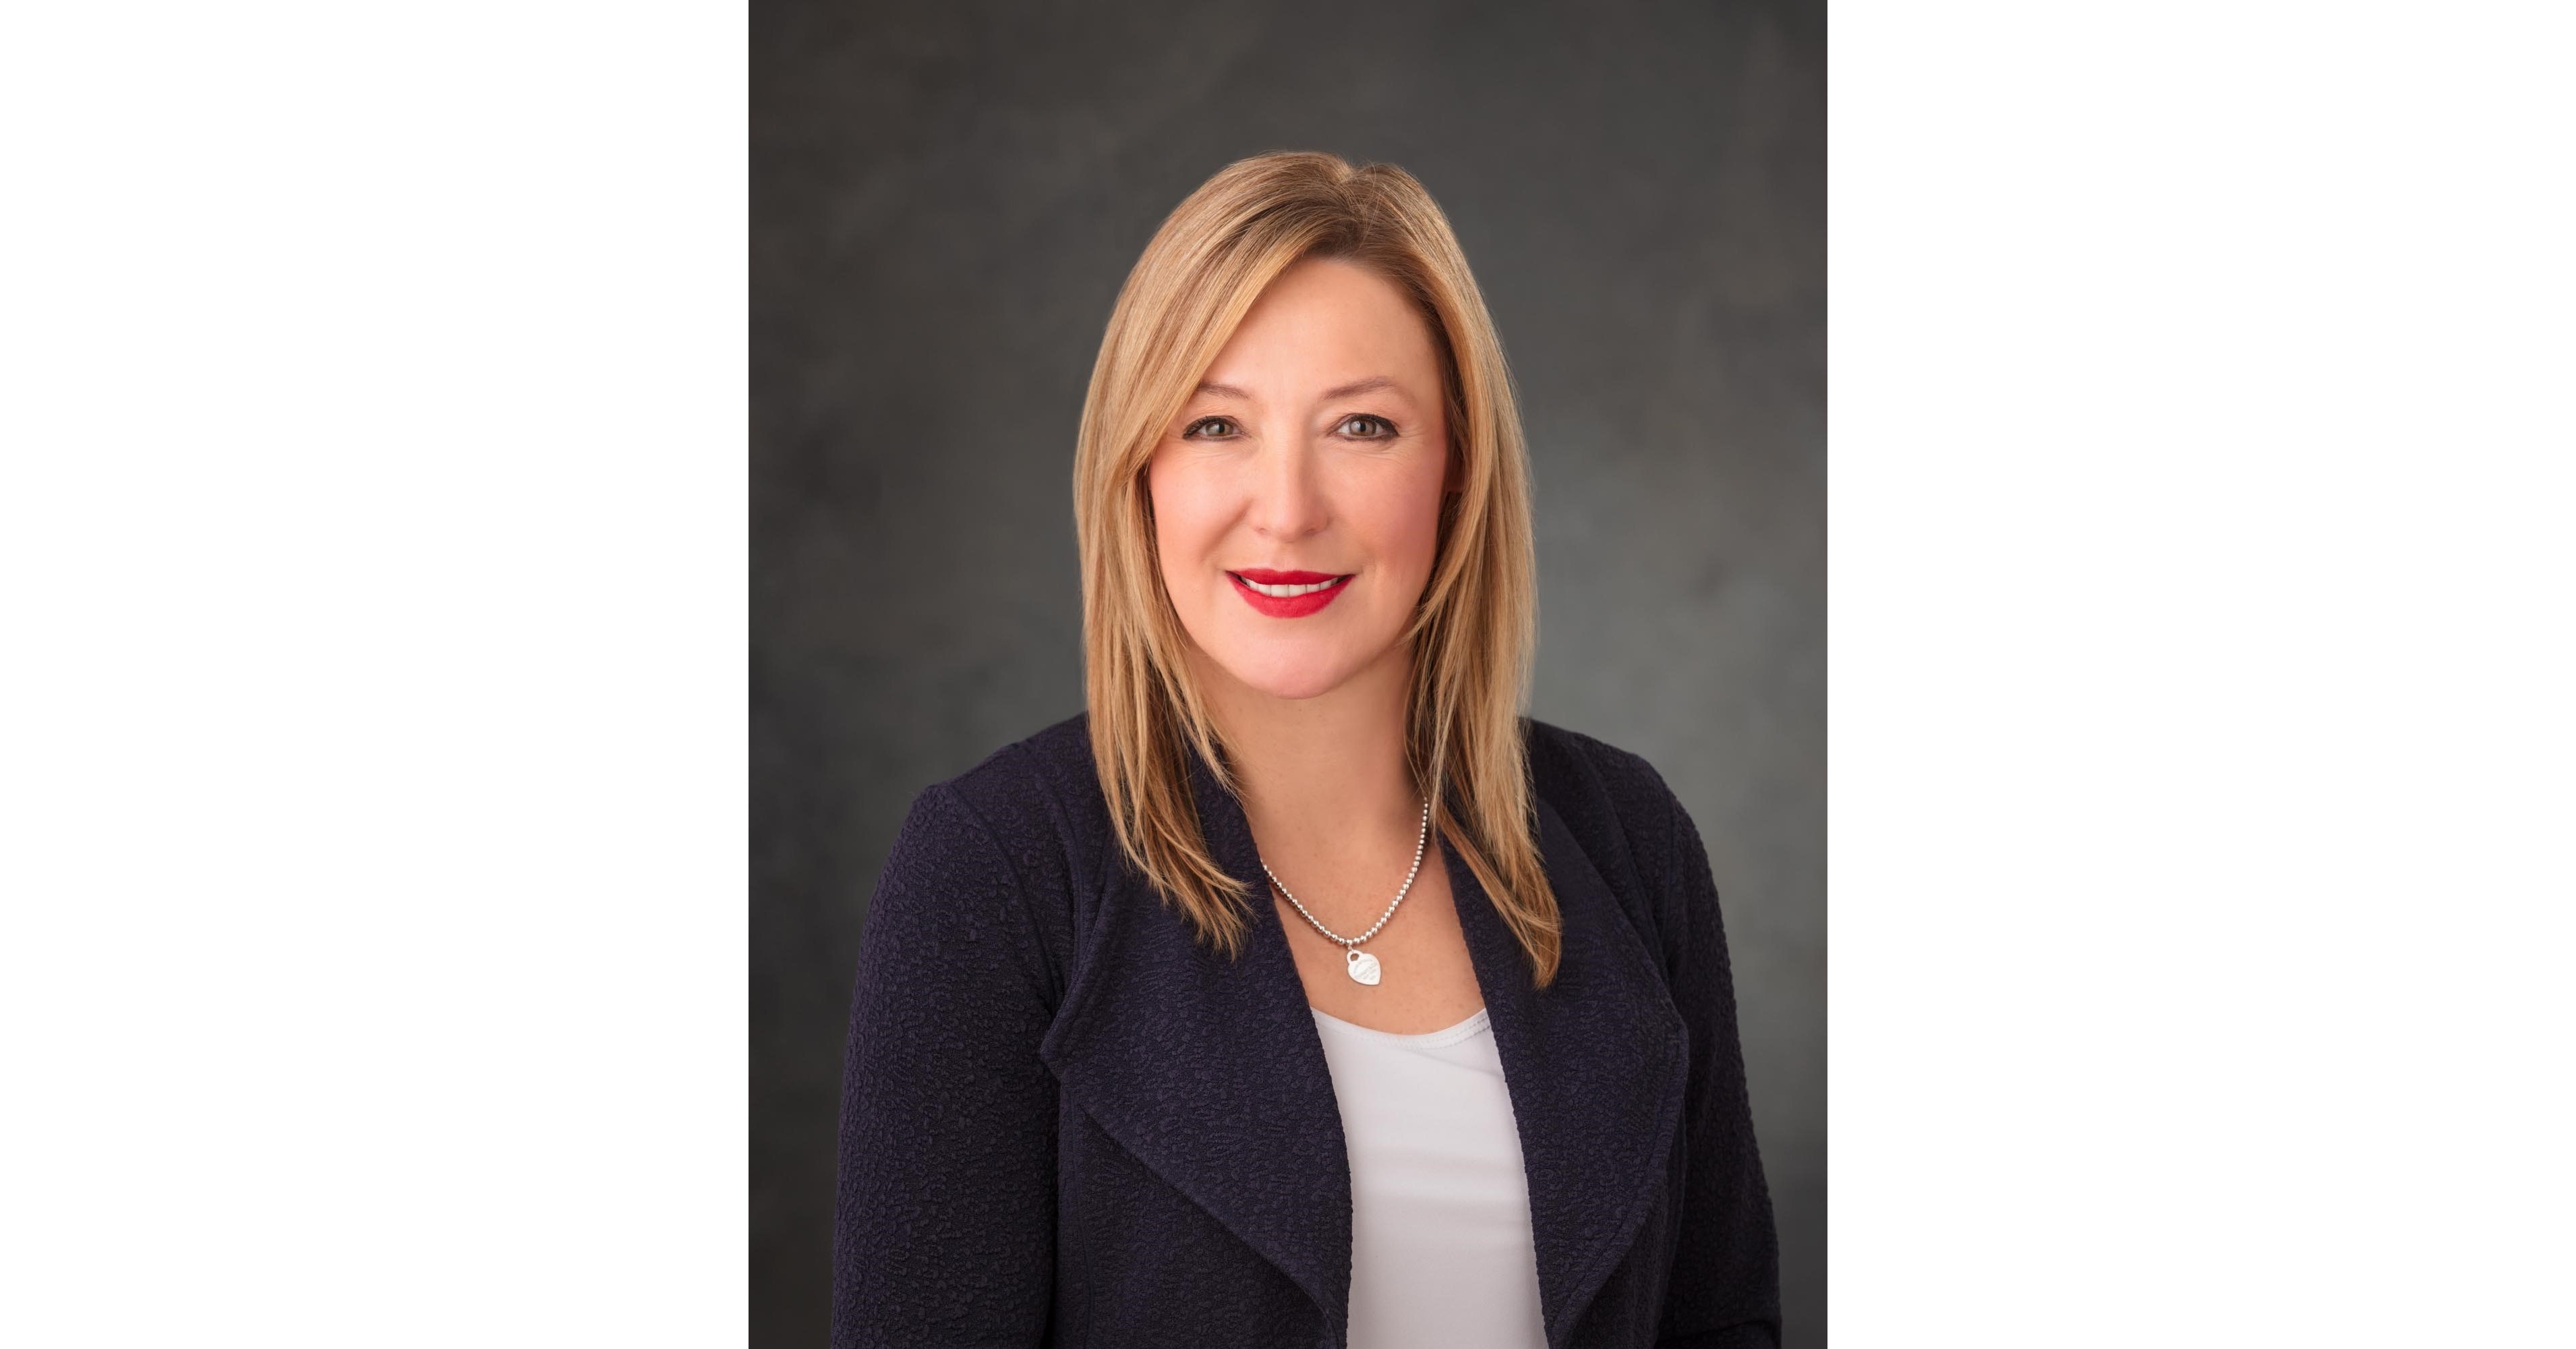 Cambia Health Solutions appoints Donna L. Milavetz, MD, MPH as chief medical officer